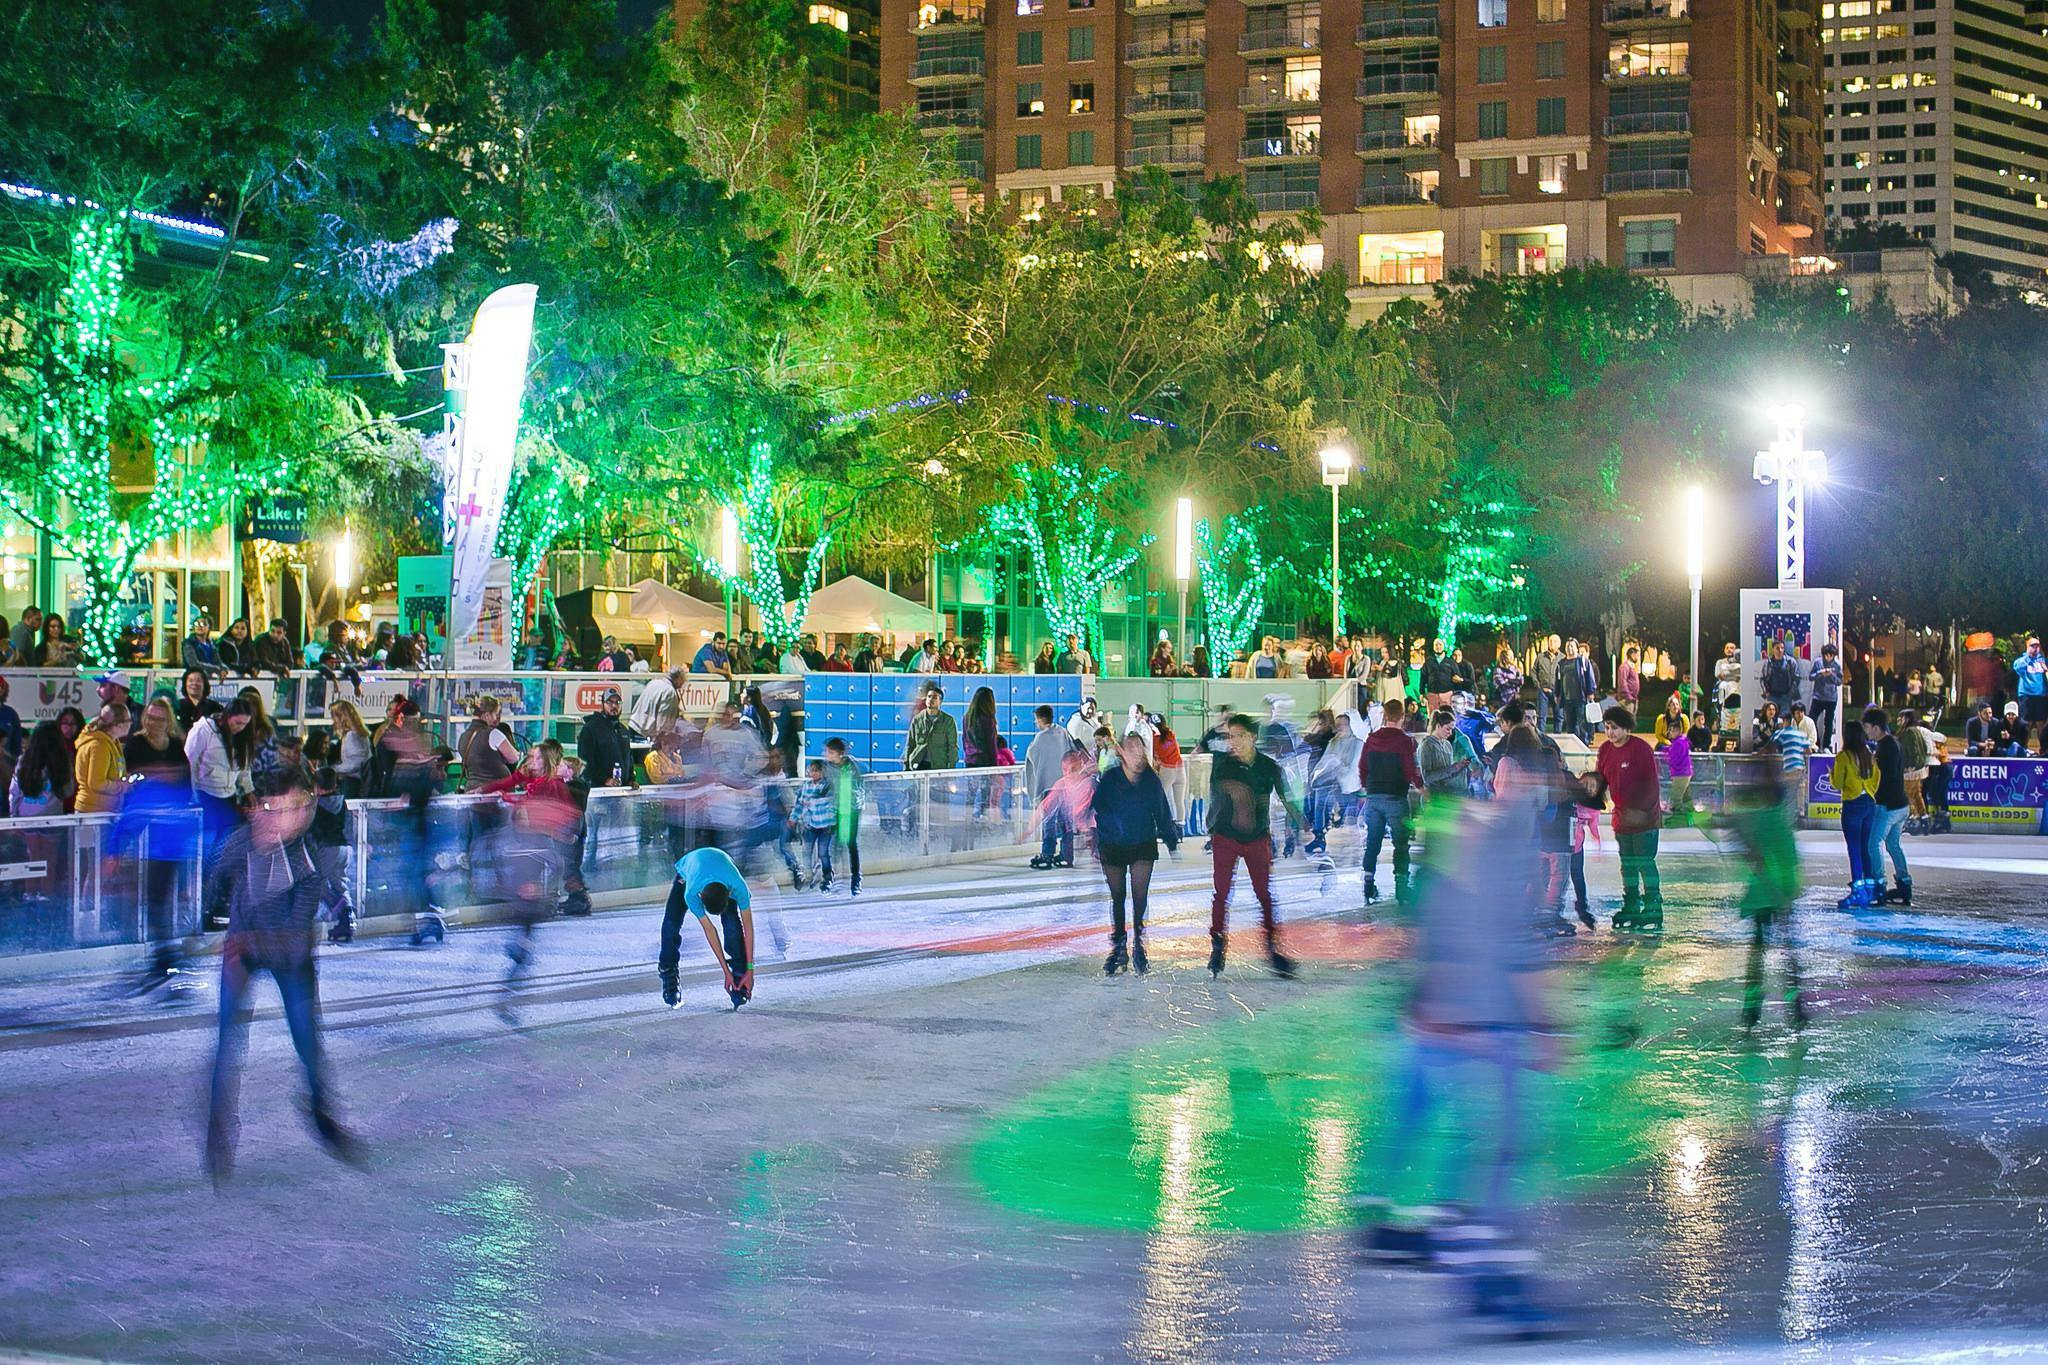 The ICE at Discovery Green® powered by Green Mountain Energy®